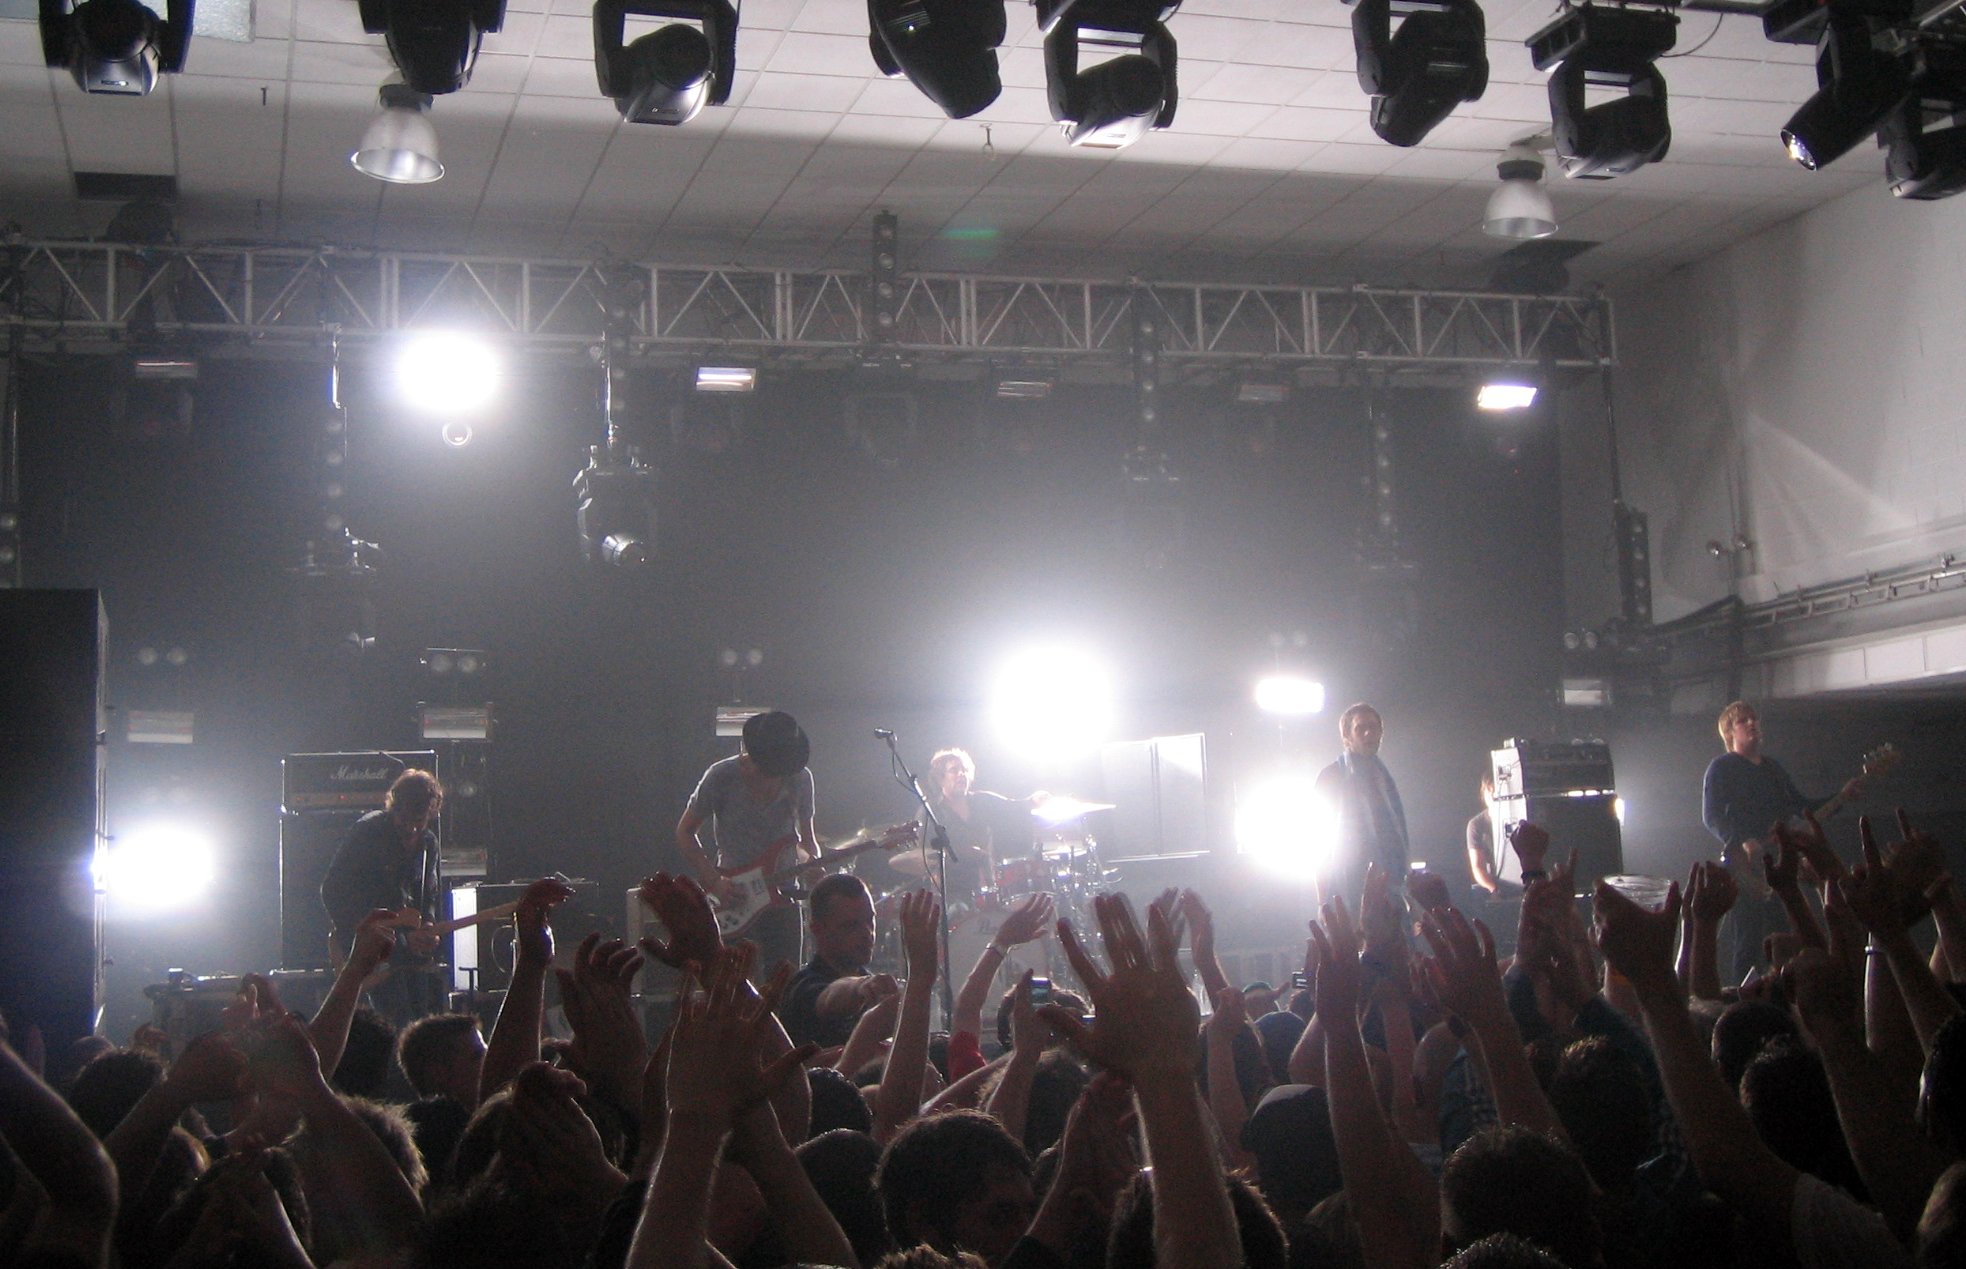 crowd with arms up in front of lights making a music show